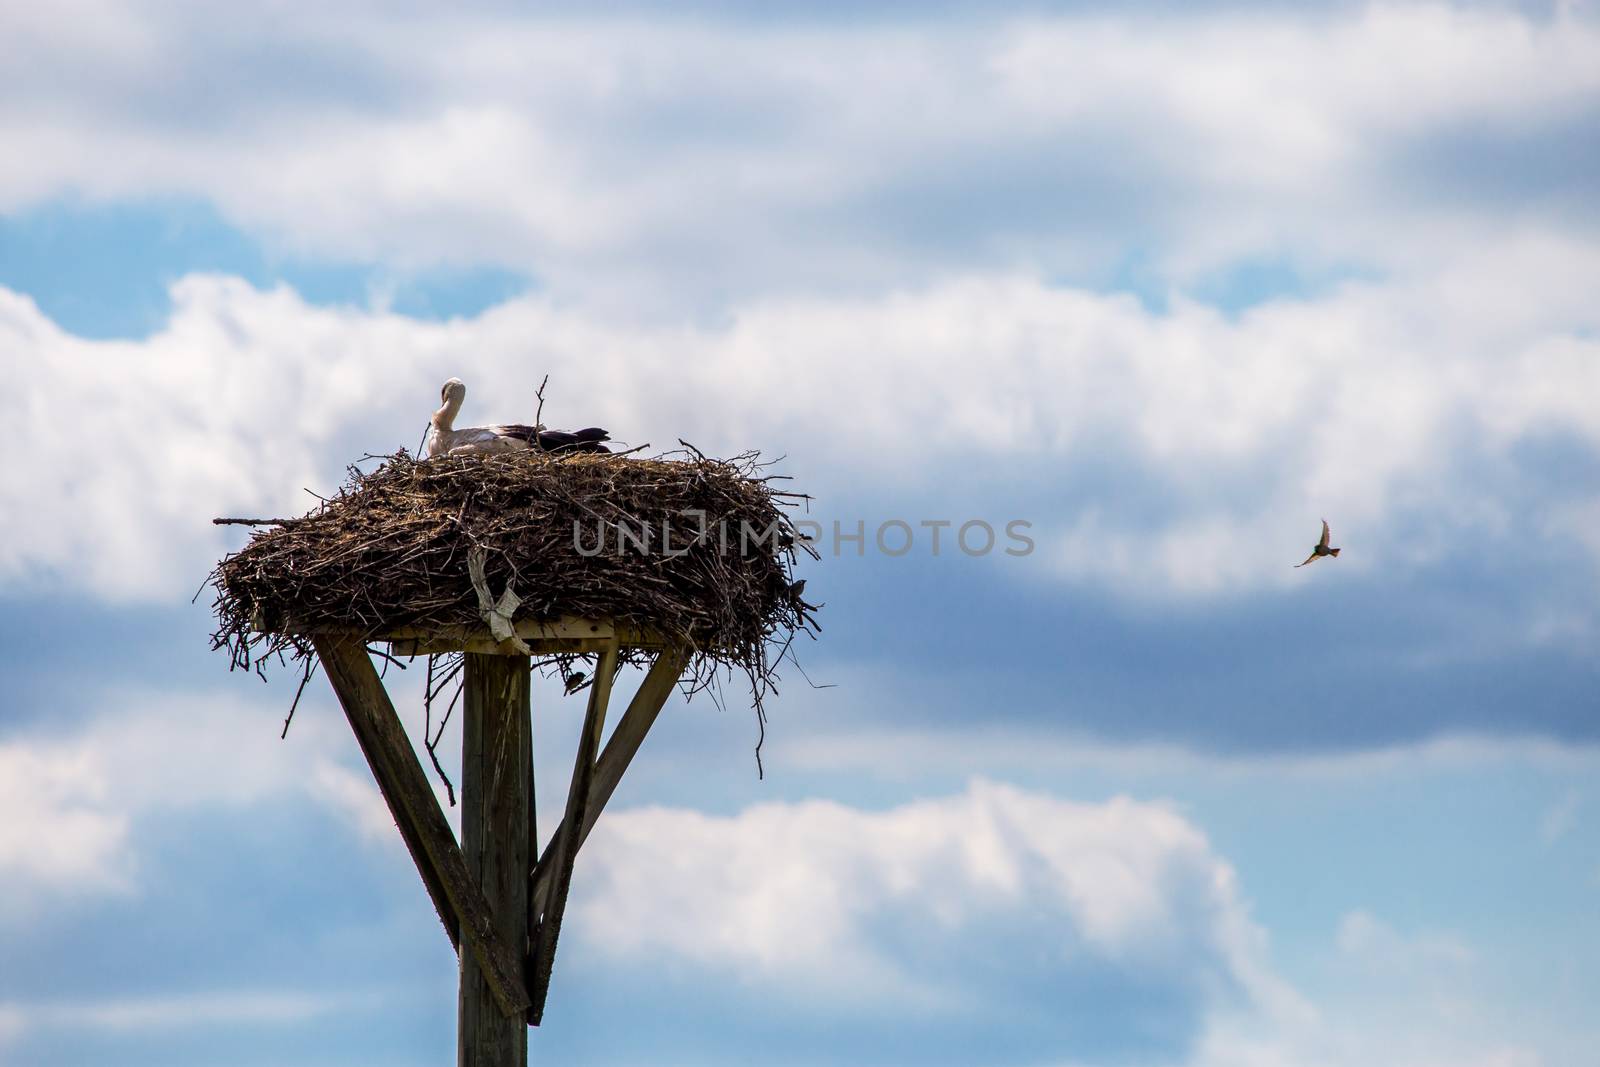 White storks baby in the nest on blue sky background. Stork nest with young storks in Latvia. 

